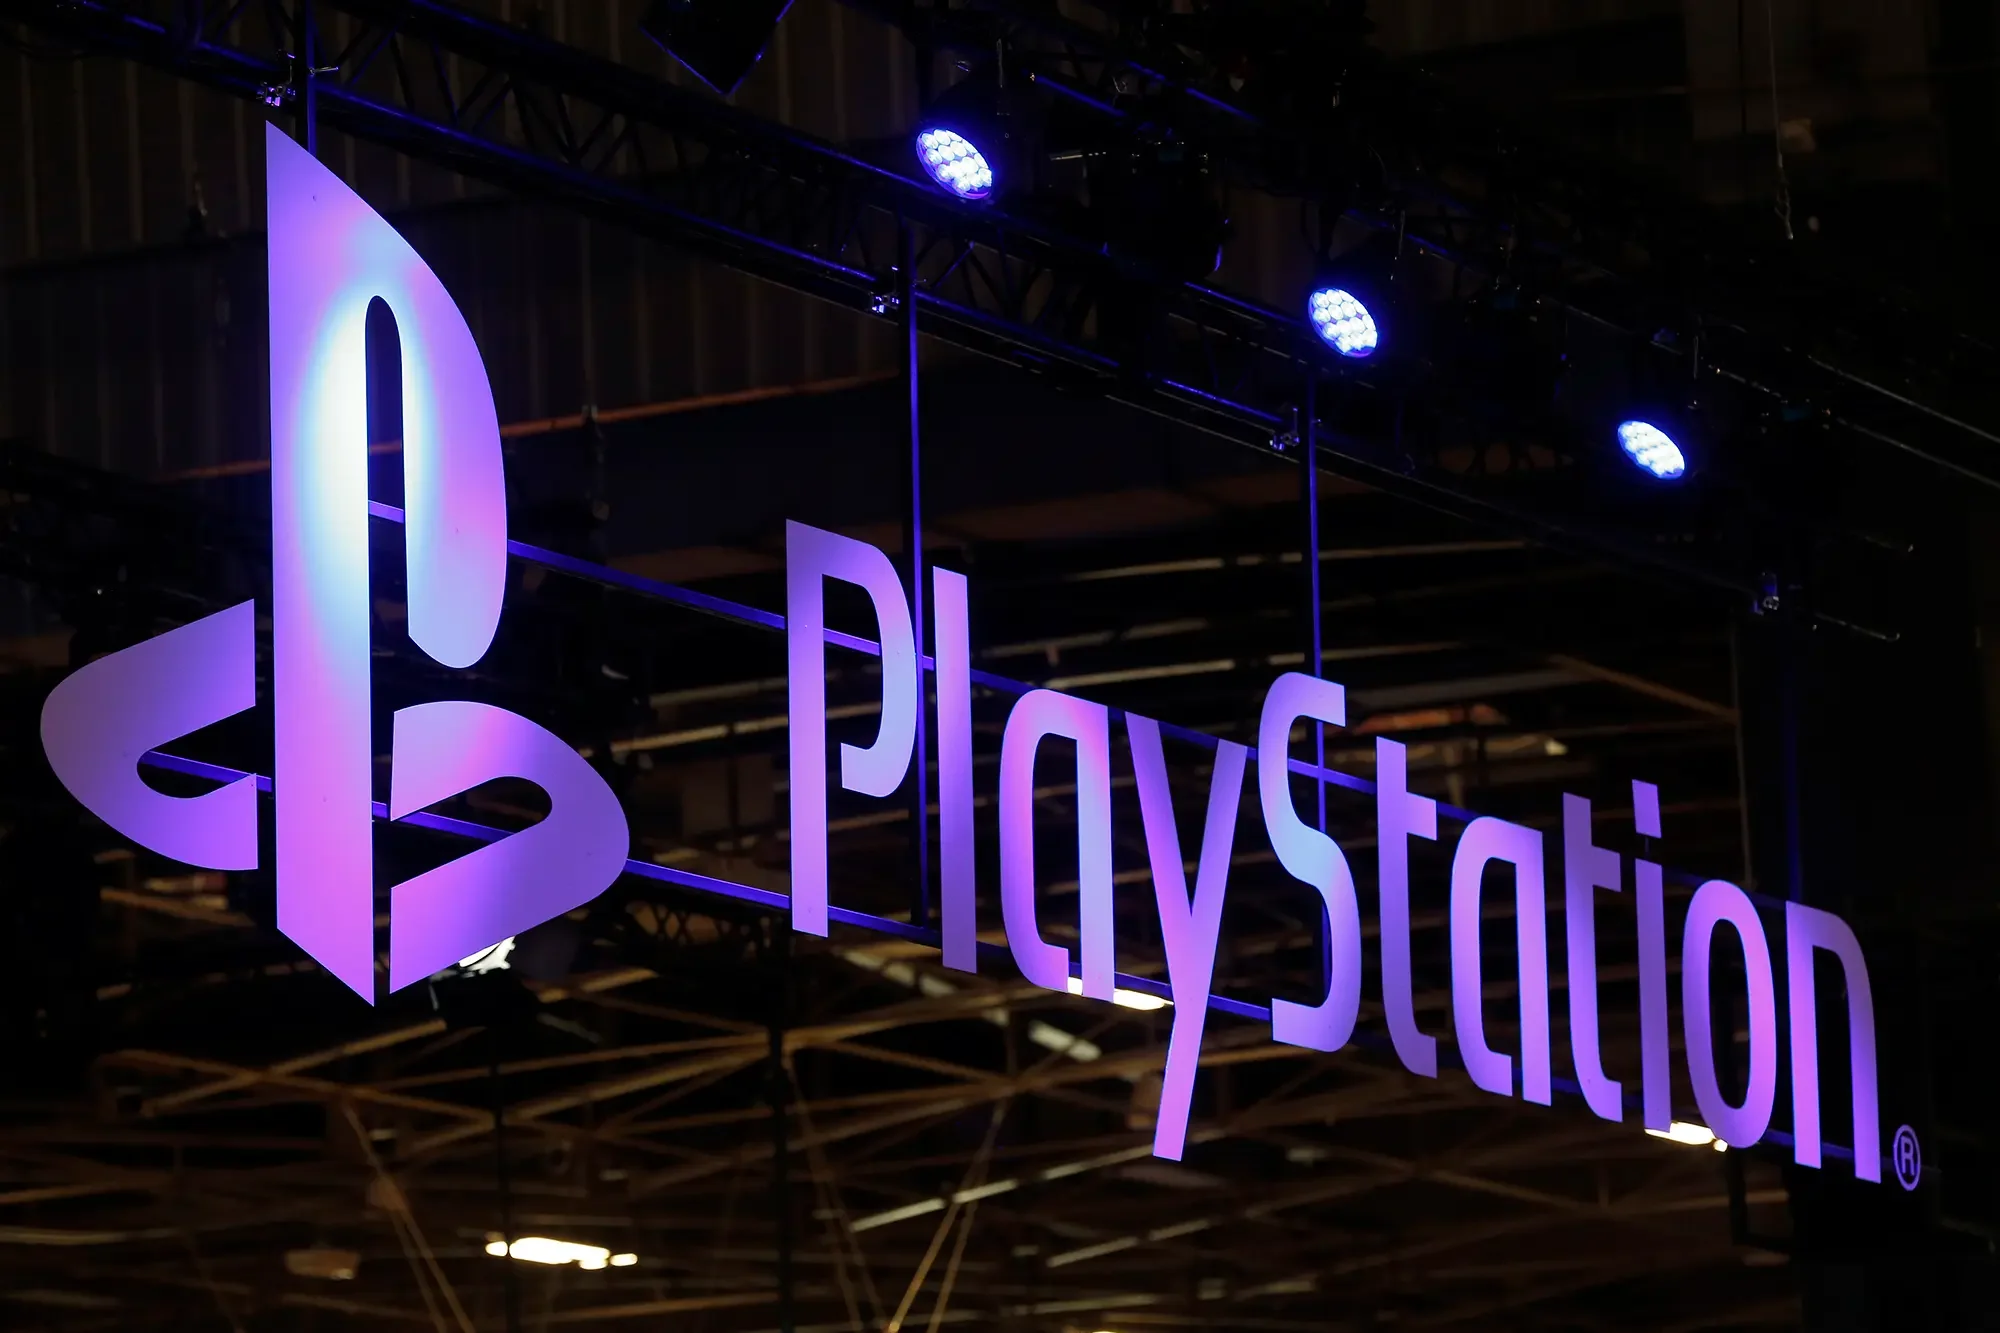 PlayStation established a mobile division and acquired a development studio for this business